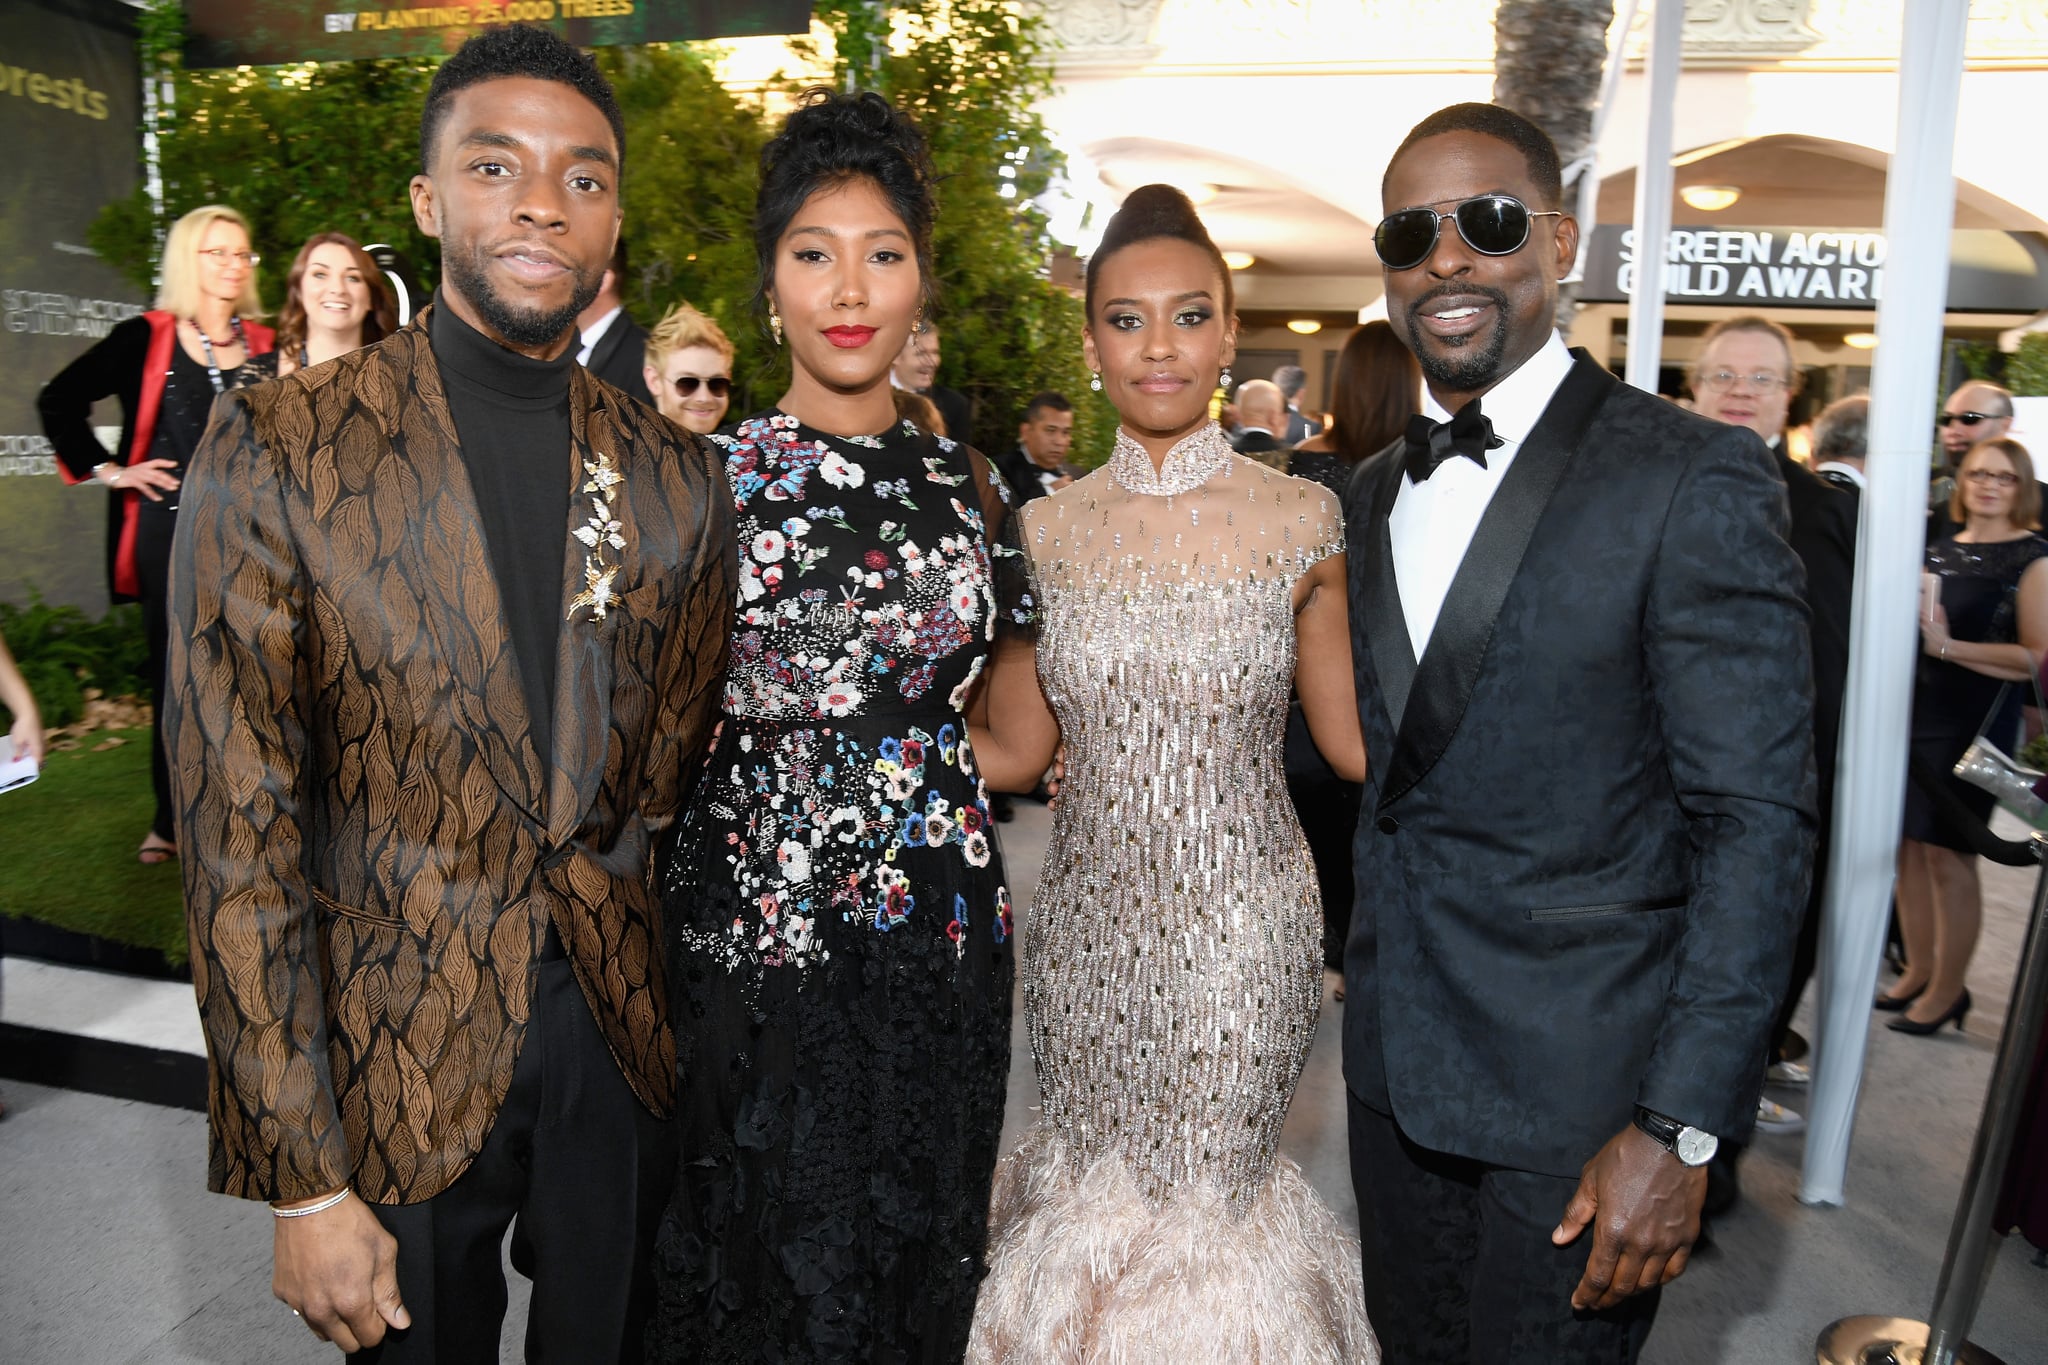 LOS ANGELES, CA - JANUARY 27:  (L-R) Chadwick Boseman, Taylor Simone Ledward, Ryan Michelle Bathe, and Sterling K. Brown attend the 25th Annual Screen Actors Guild Awards at The Shrine Auditorium on January 27, 2019 in Los Angeles, California. 480568  (Photo by Kevin Mazur/Getty Images for Turner)